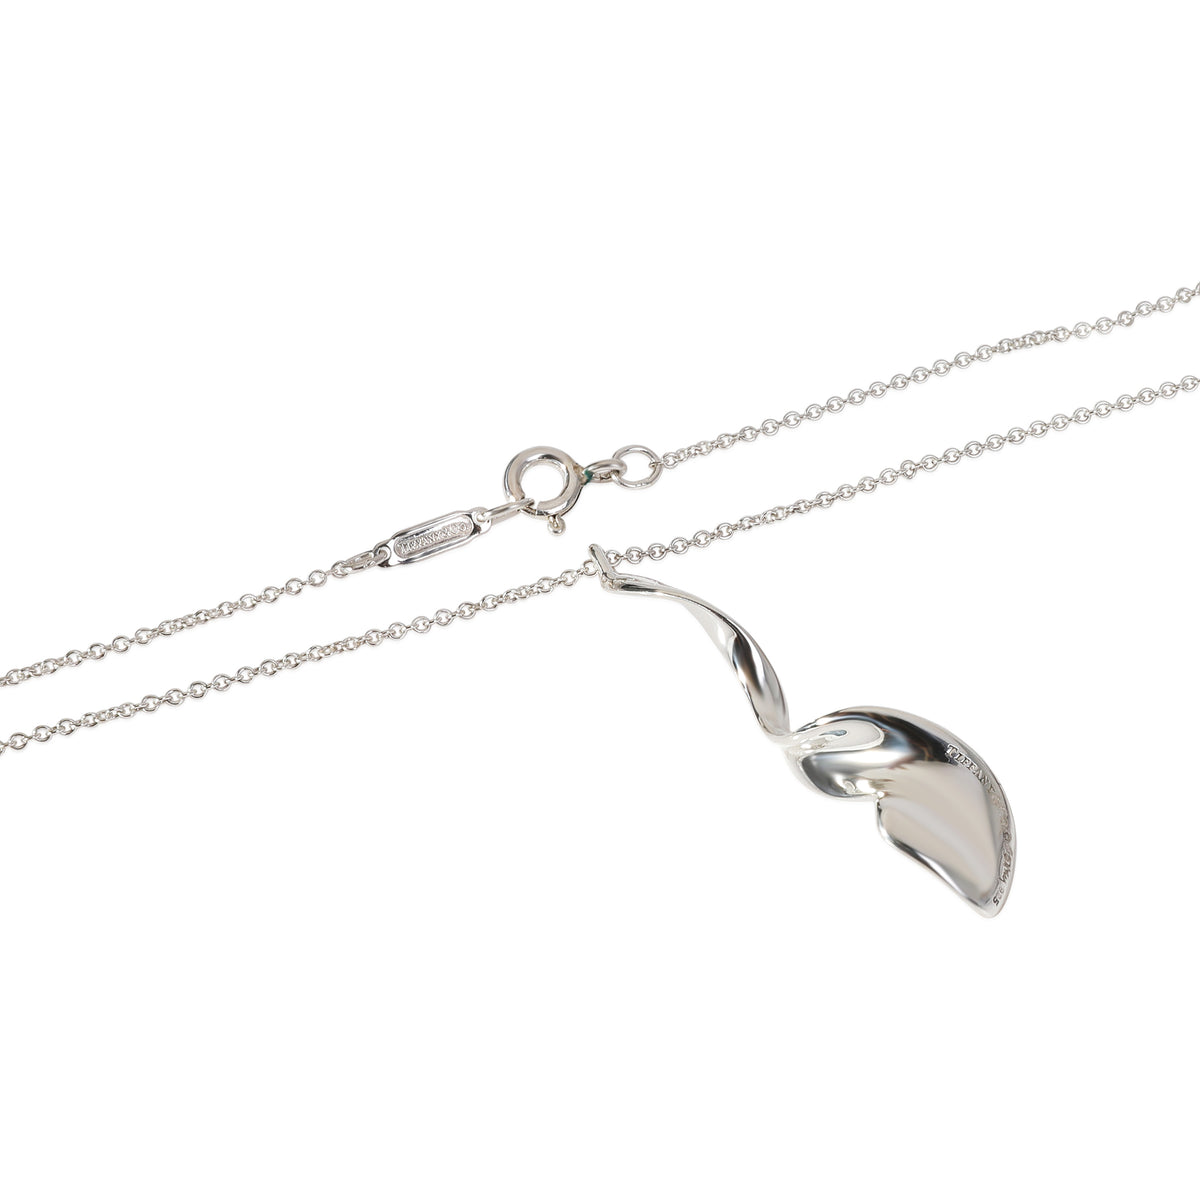 Tiffany & Co. Frank Gehry Orchid Twist Pendant in Sterling Silver